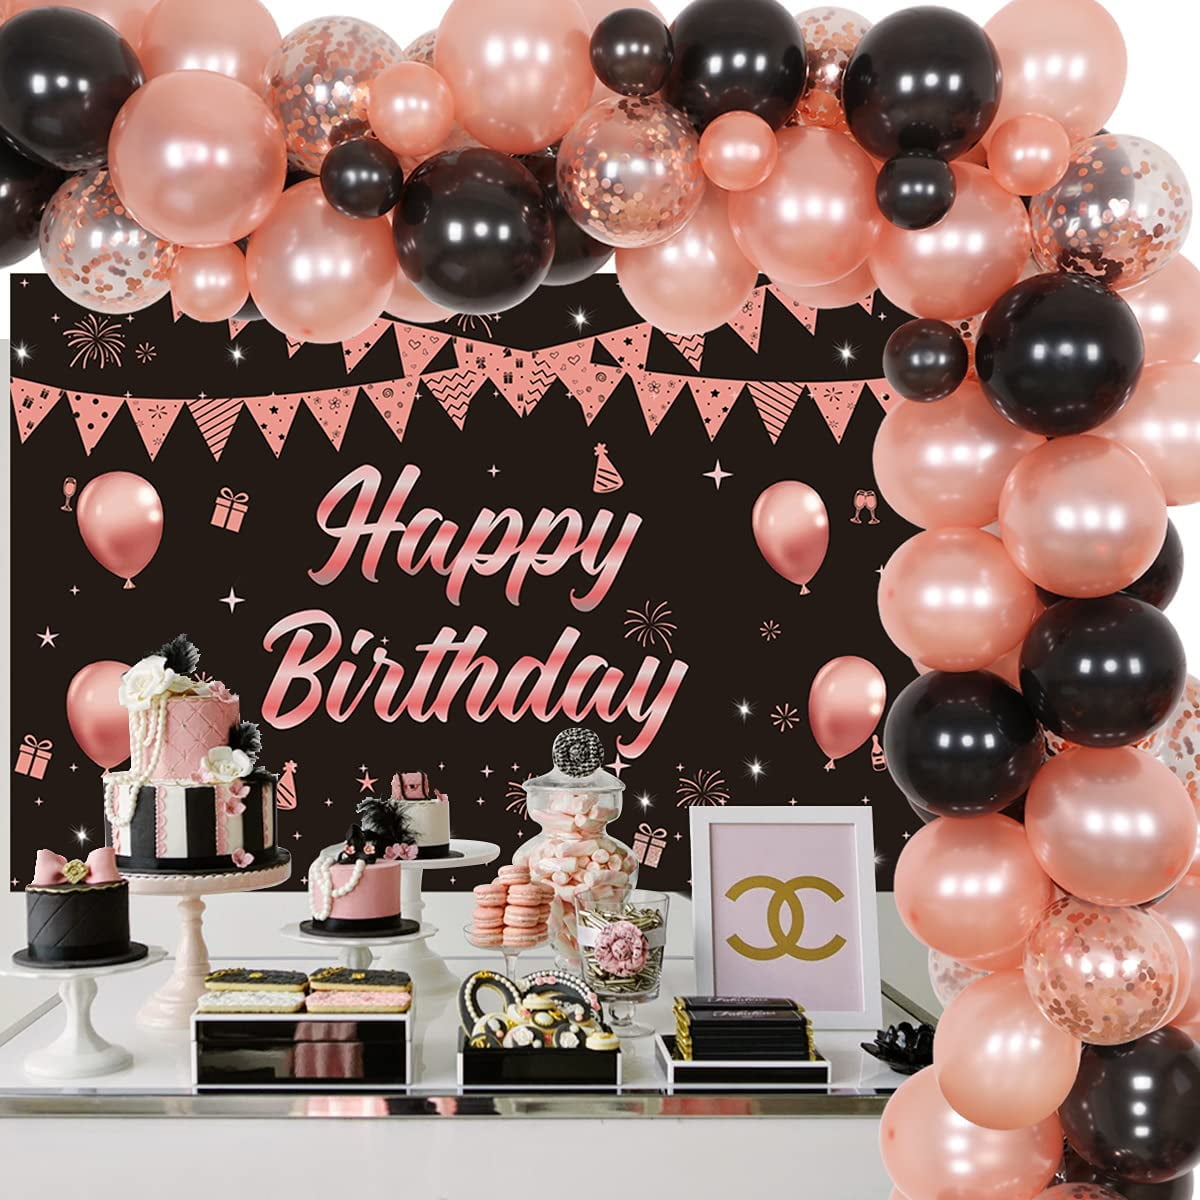 Black, Red and Silver Birthday Setup Birthday Party Ideas, Photo 3 of 10